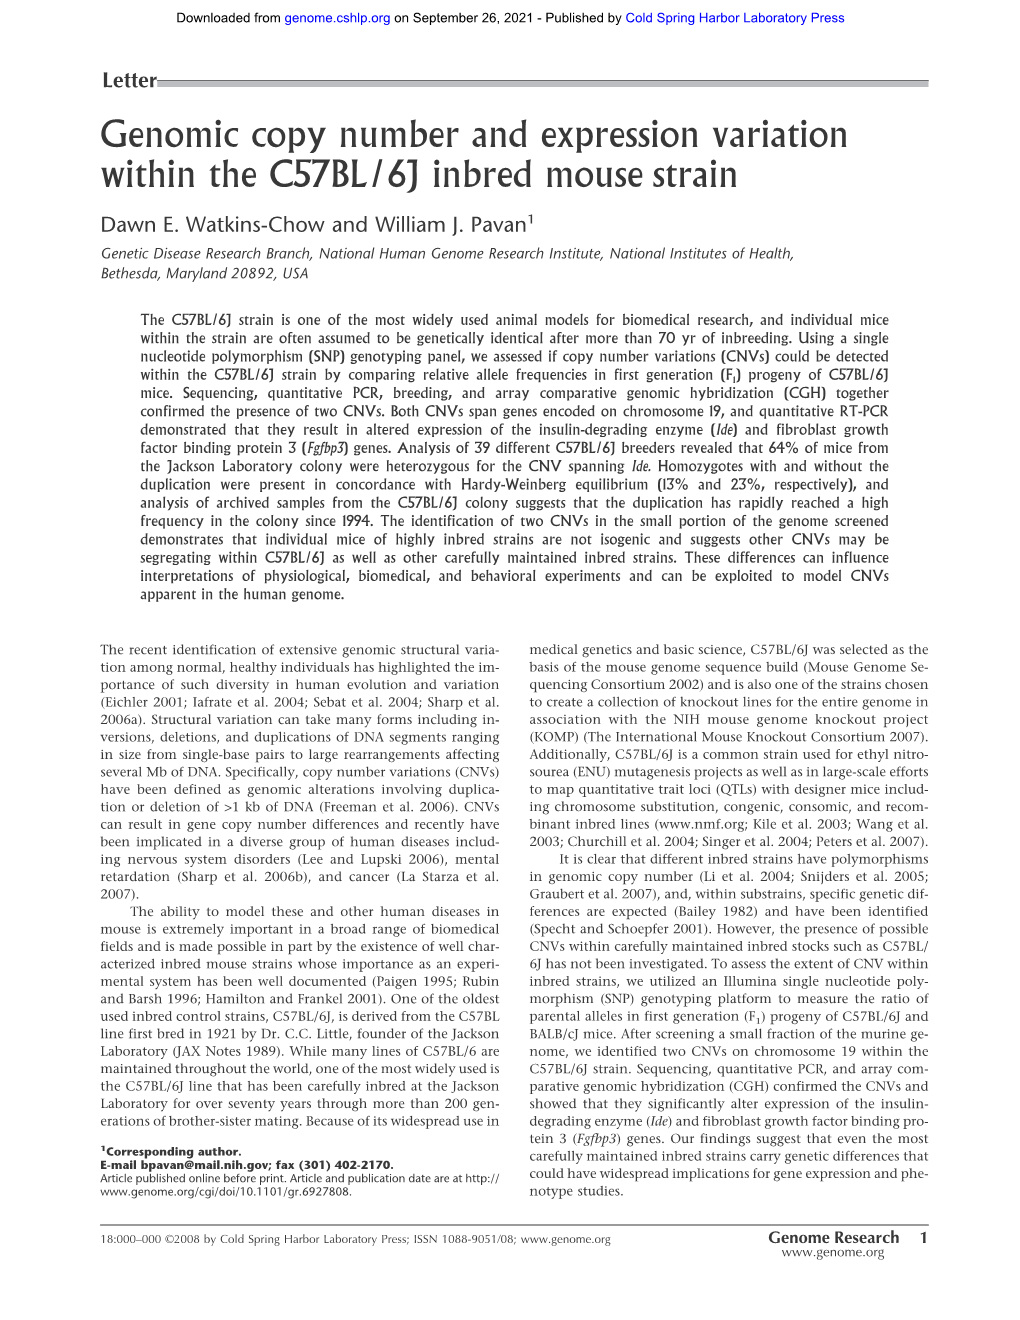 Genomic Copy Number and Expression Variation Within the C57BL/6J Inbred Mouse Strain